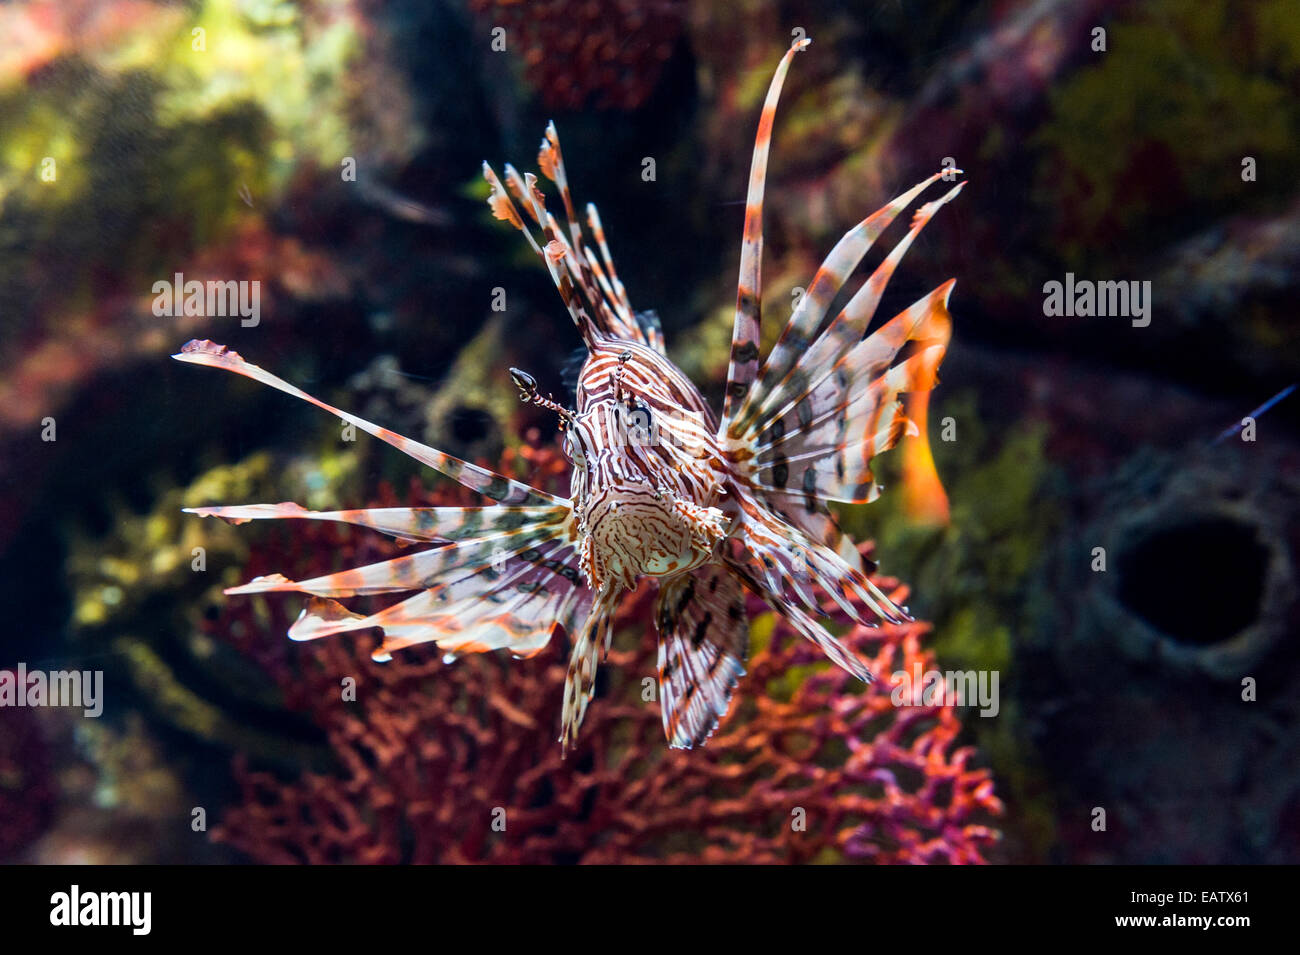 A Red Lion Fish displaying it's fins and venomous spines. Stock Photo